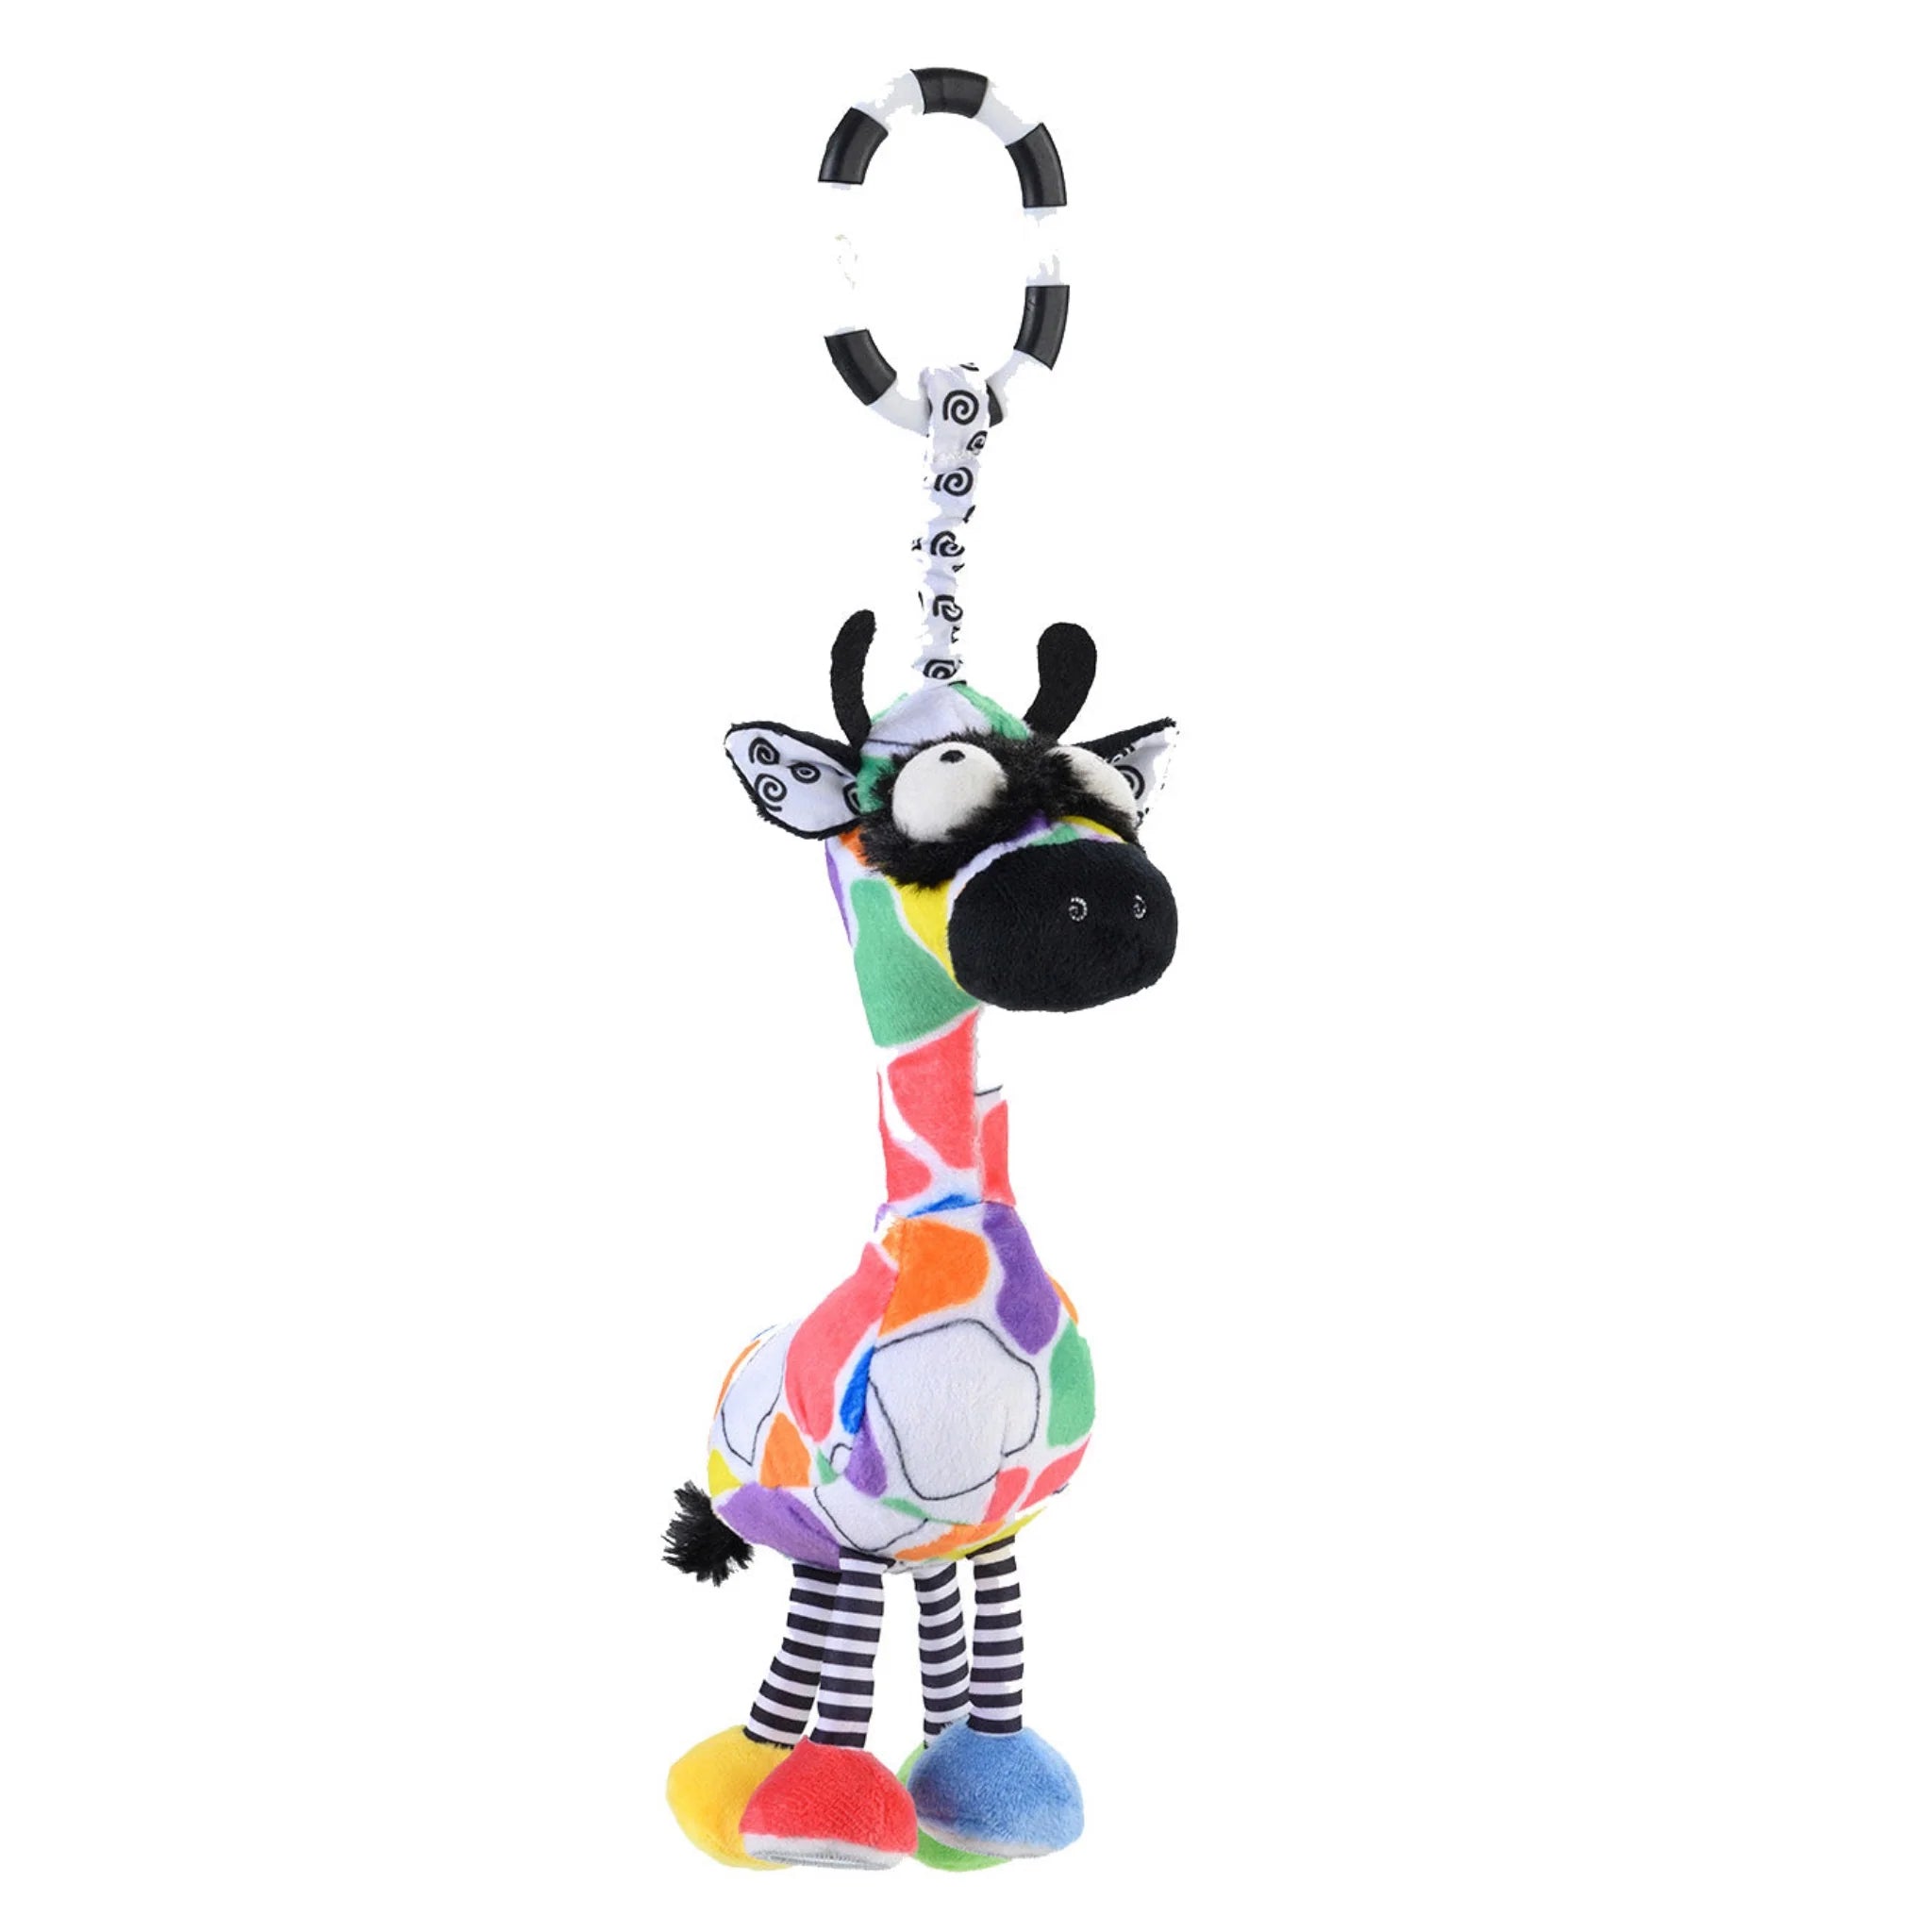 Jaffy the Fringe Footed Giraffe Chime & See Hanging Activity Toy - Twinkle Twinkle Little One